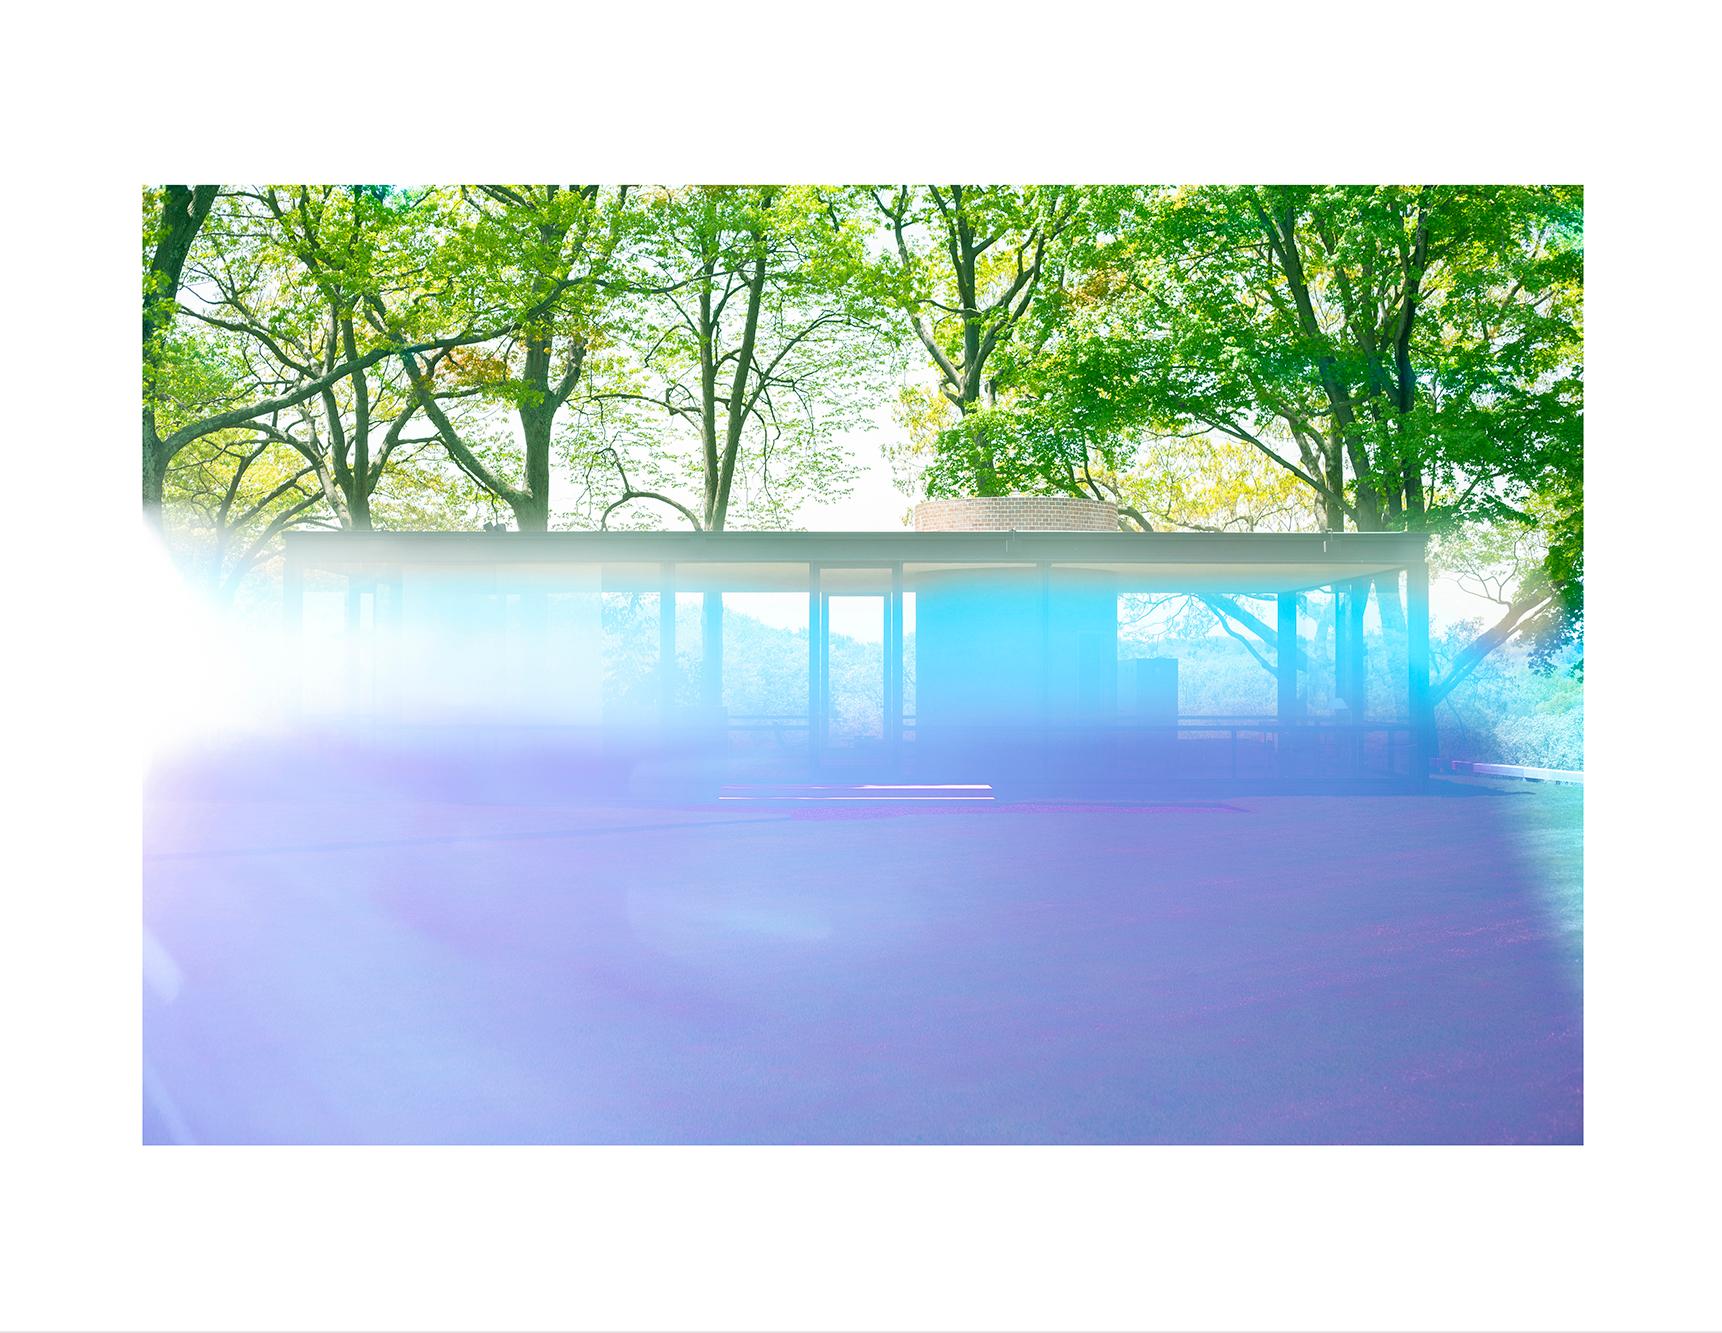 JAMES WELLING
6007, 2008
Epson Stylus Pro 9900 print on Museo Silver Rag paper
Image size: 13.5 x 20 inches, Sheet size: 19 x 24 inches
Edition of 20
Signed, titled, and dated by the artist